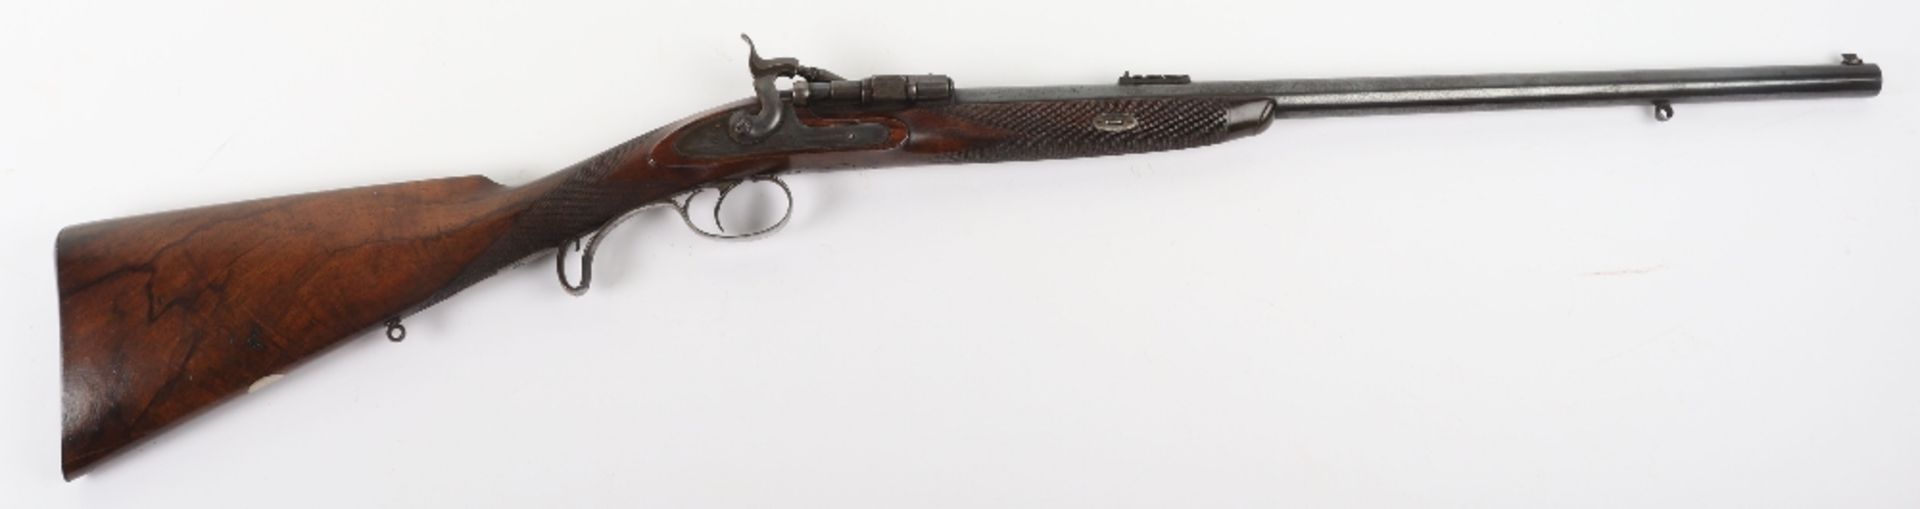 25-Bore Snider Action Breech Loading Sporting Rifle by Reilly No. 15227 - Image 10 of 14